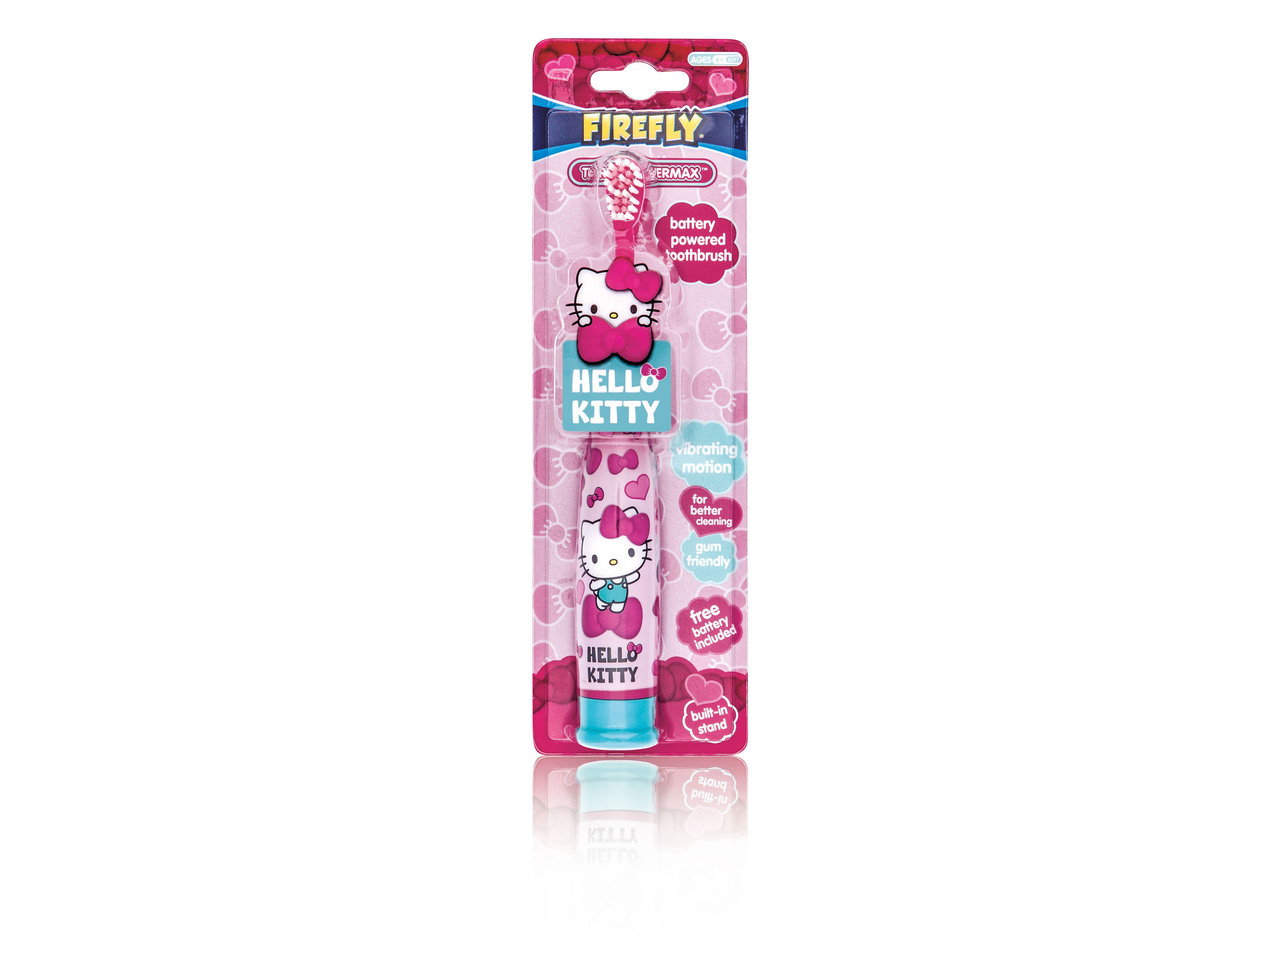 "Star Wars", "Hello Kitty" or "Winx" Electric Toothbrush